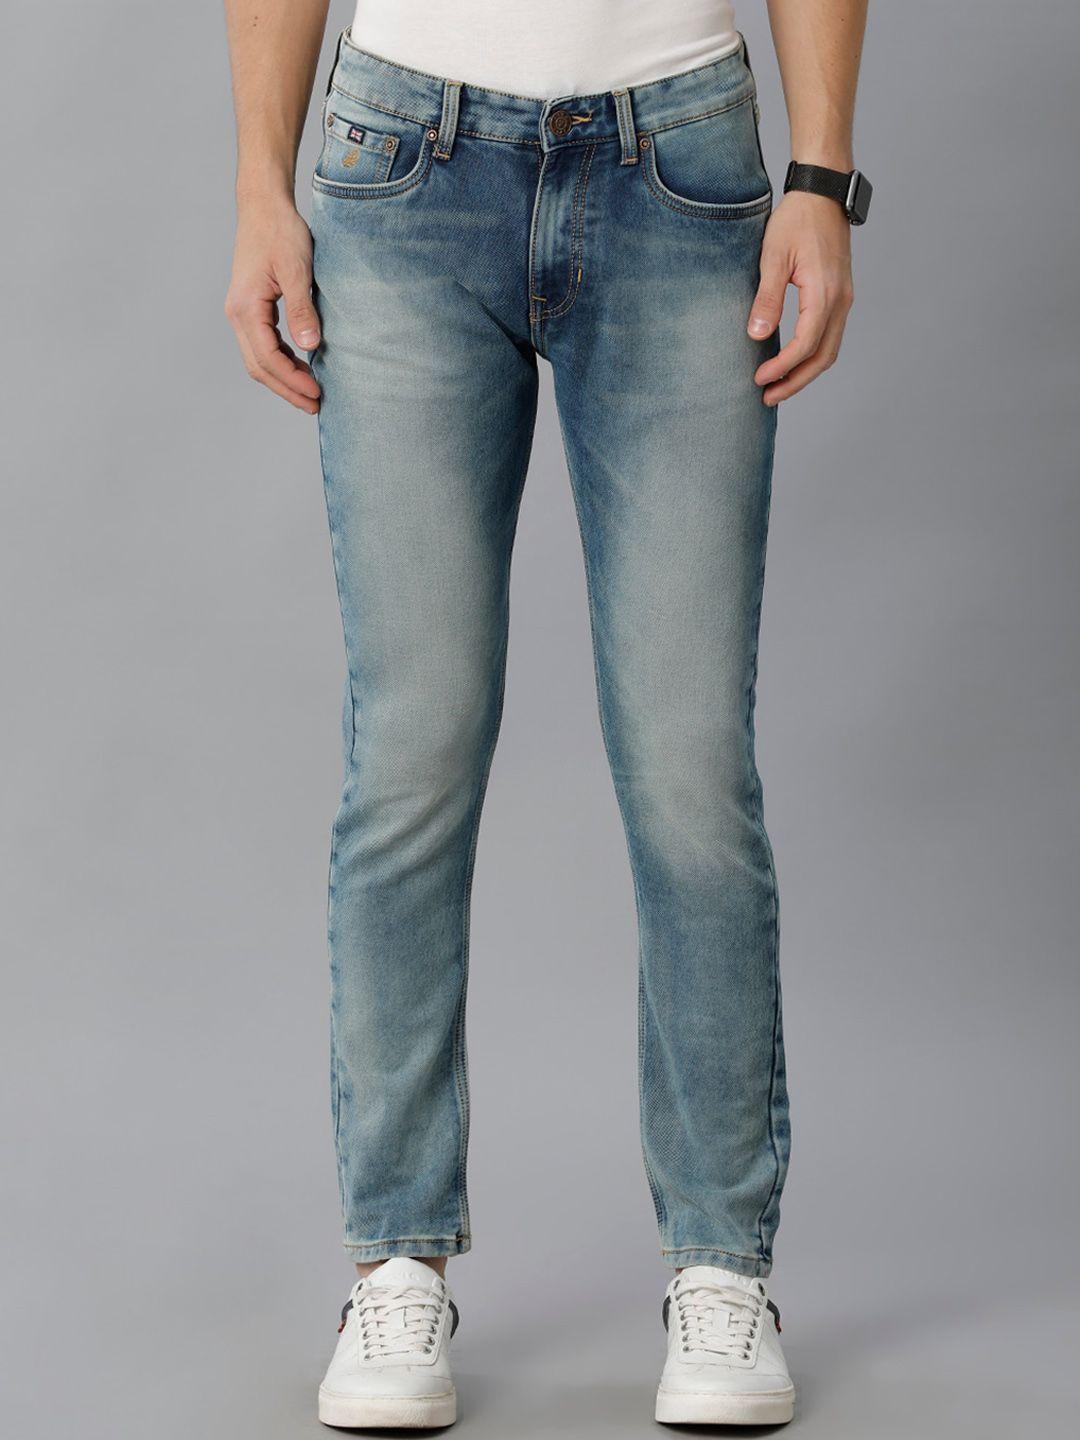 double two lean slim fit heavy fade stretchable cotton jeans